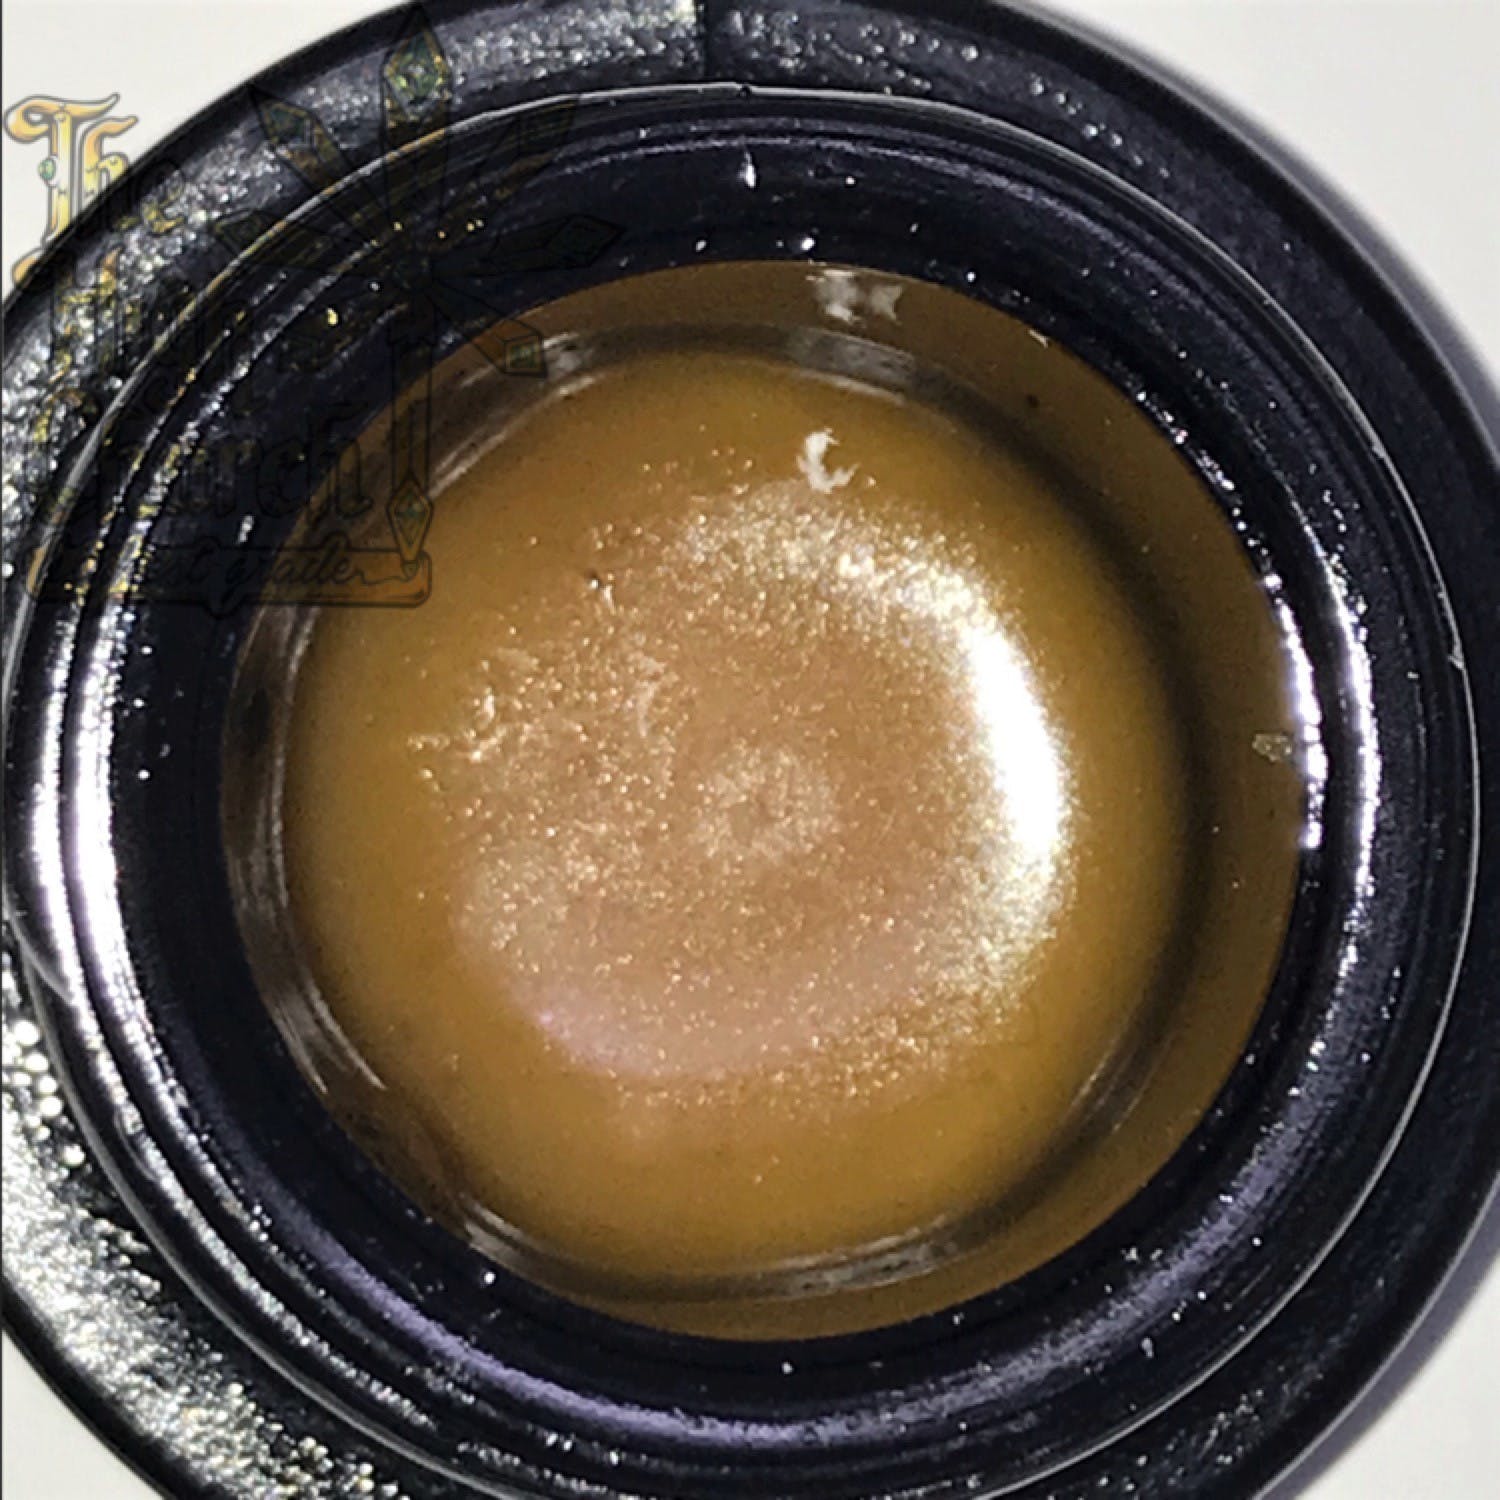 concentrate-shaman-extracts-gelato-2333-live-resin-cake-badder